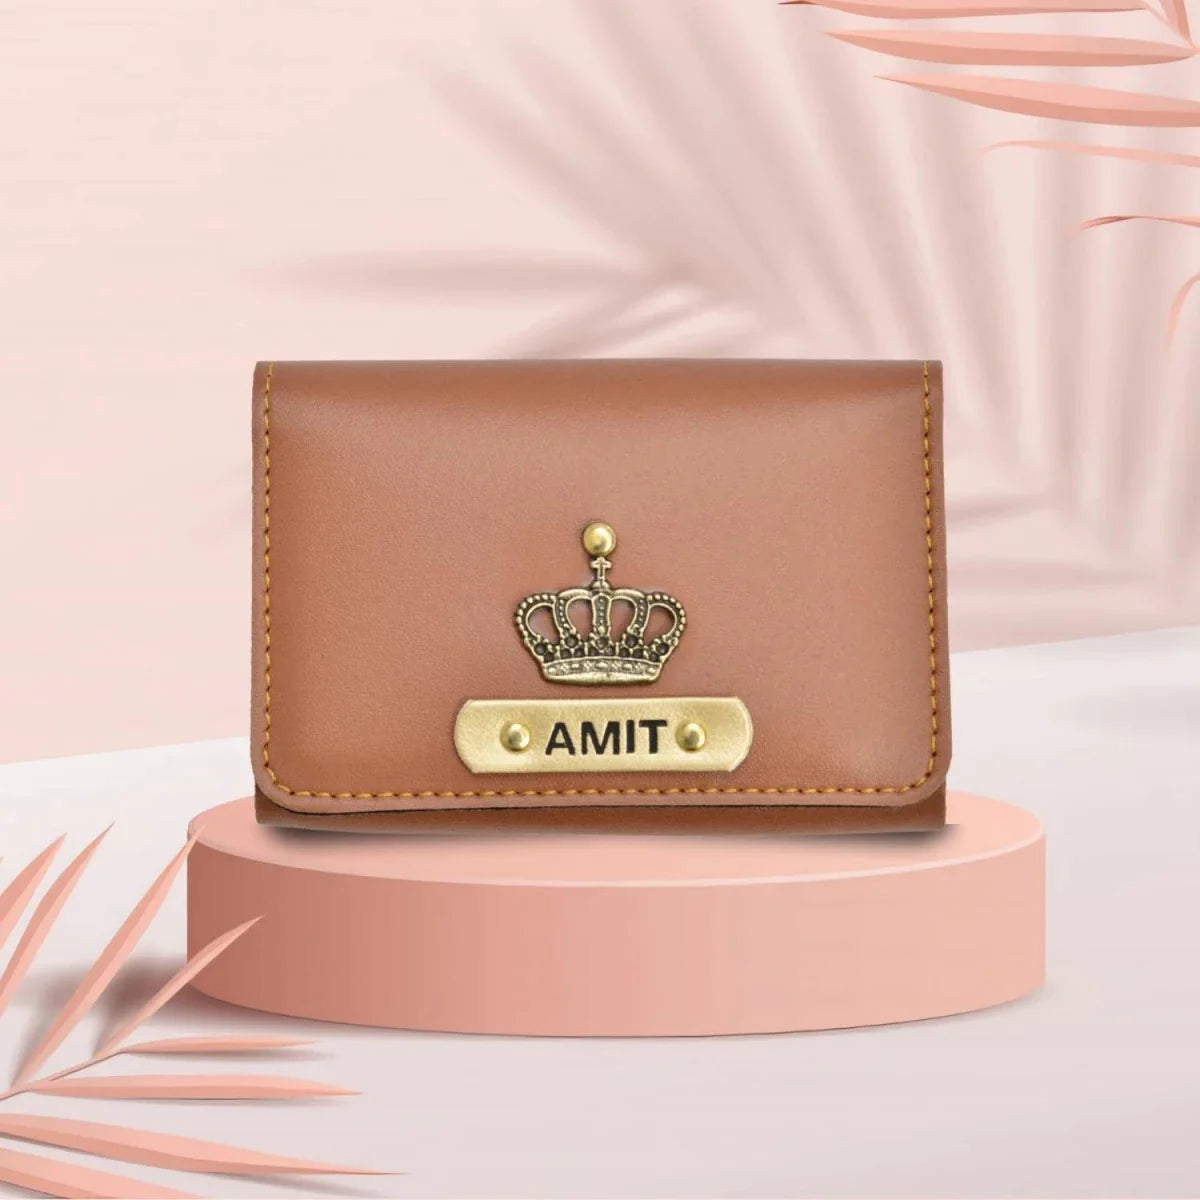 Stand out from the crowd with this unique and customized visiting card holder.